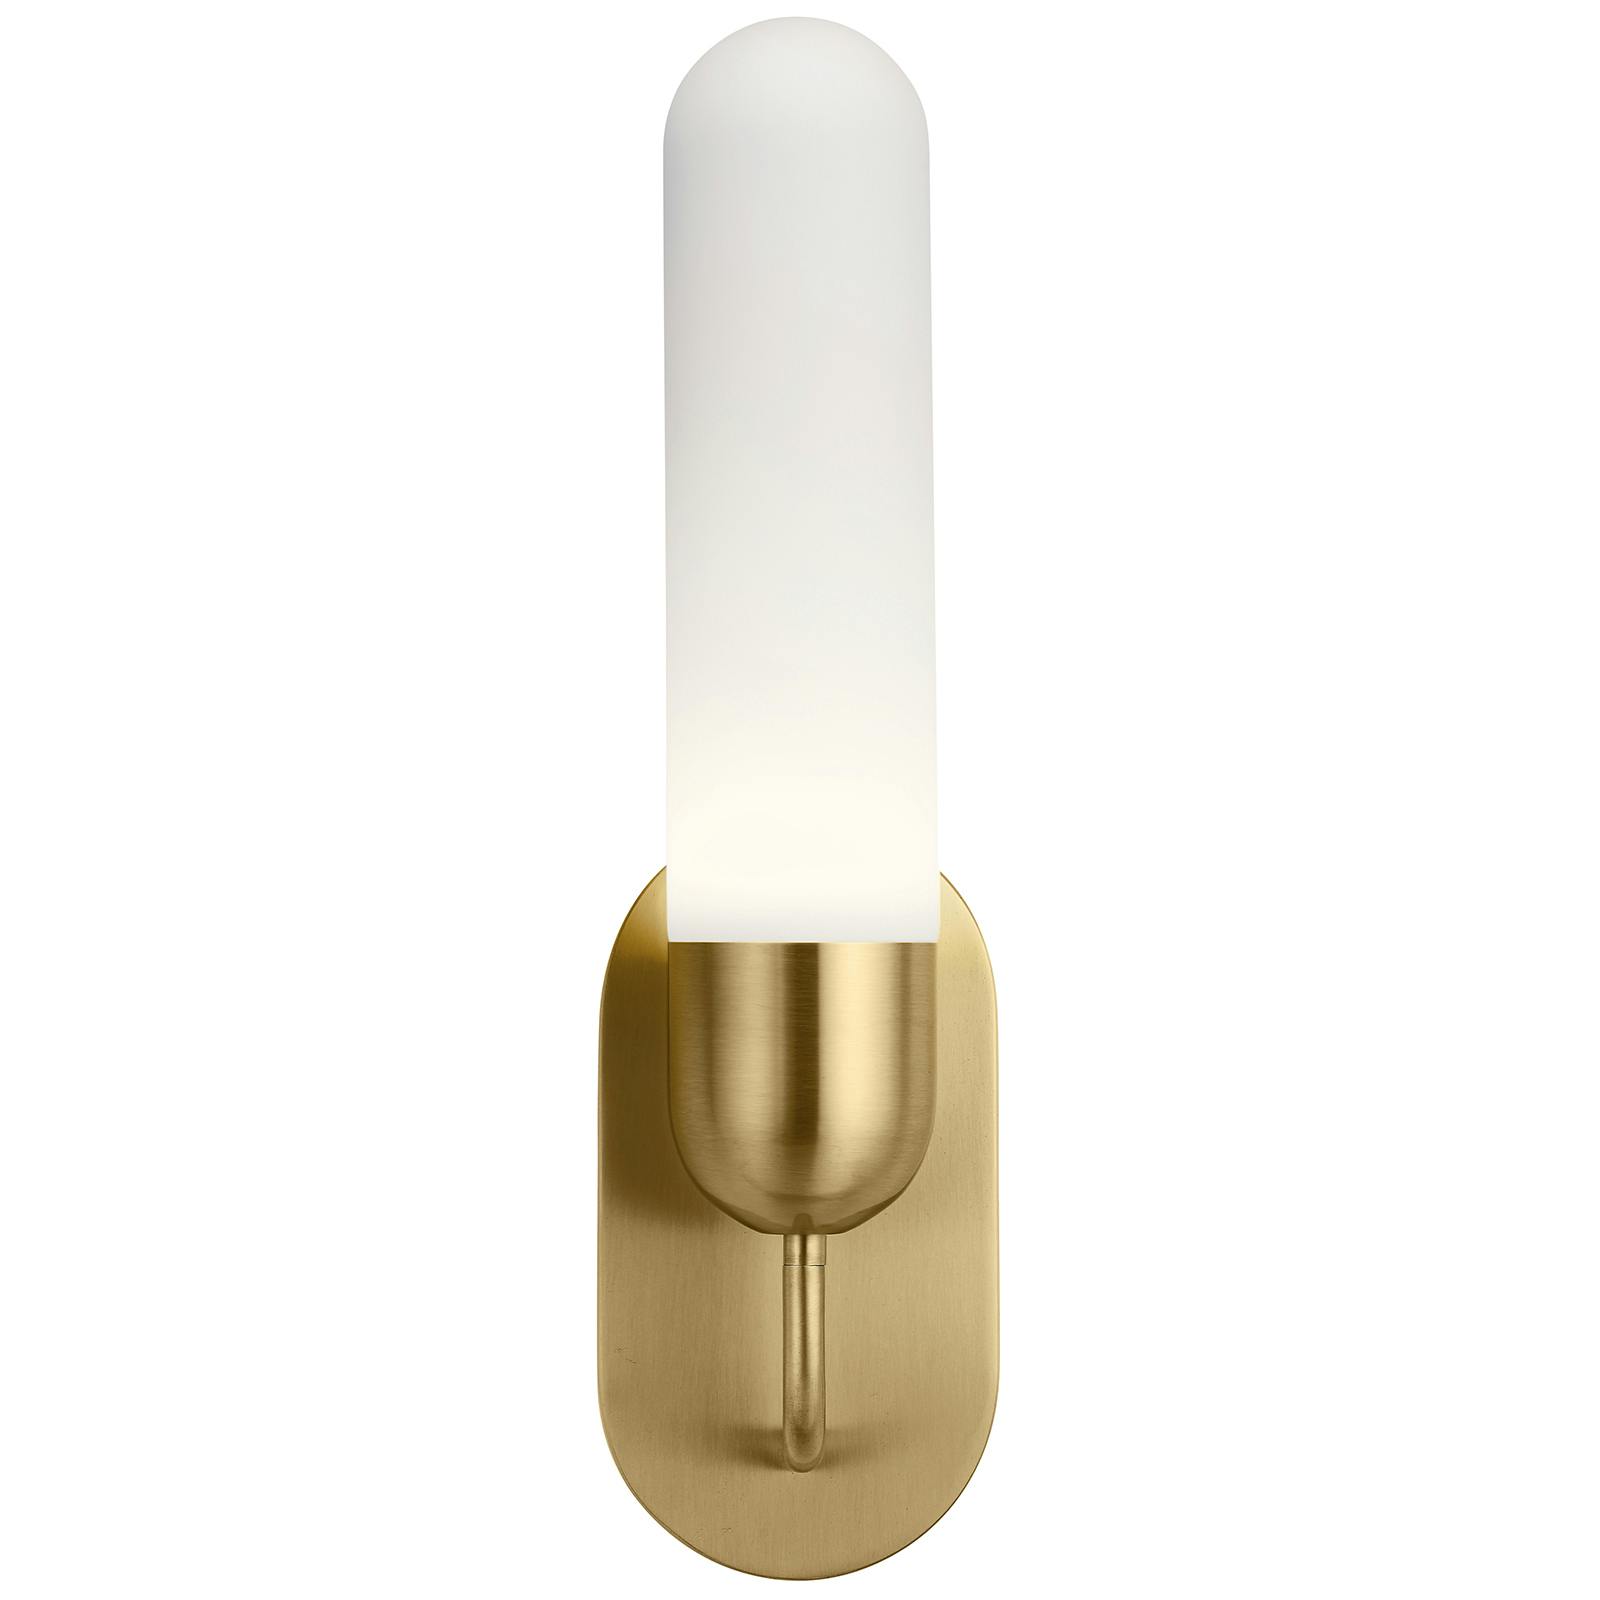 The Sorno Wall Sconce Champagne Gold facing up on a white background